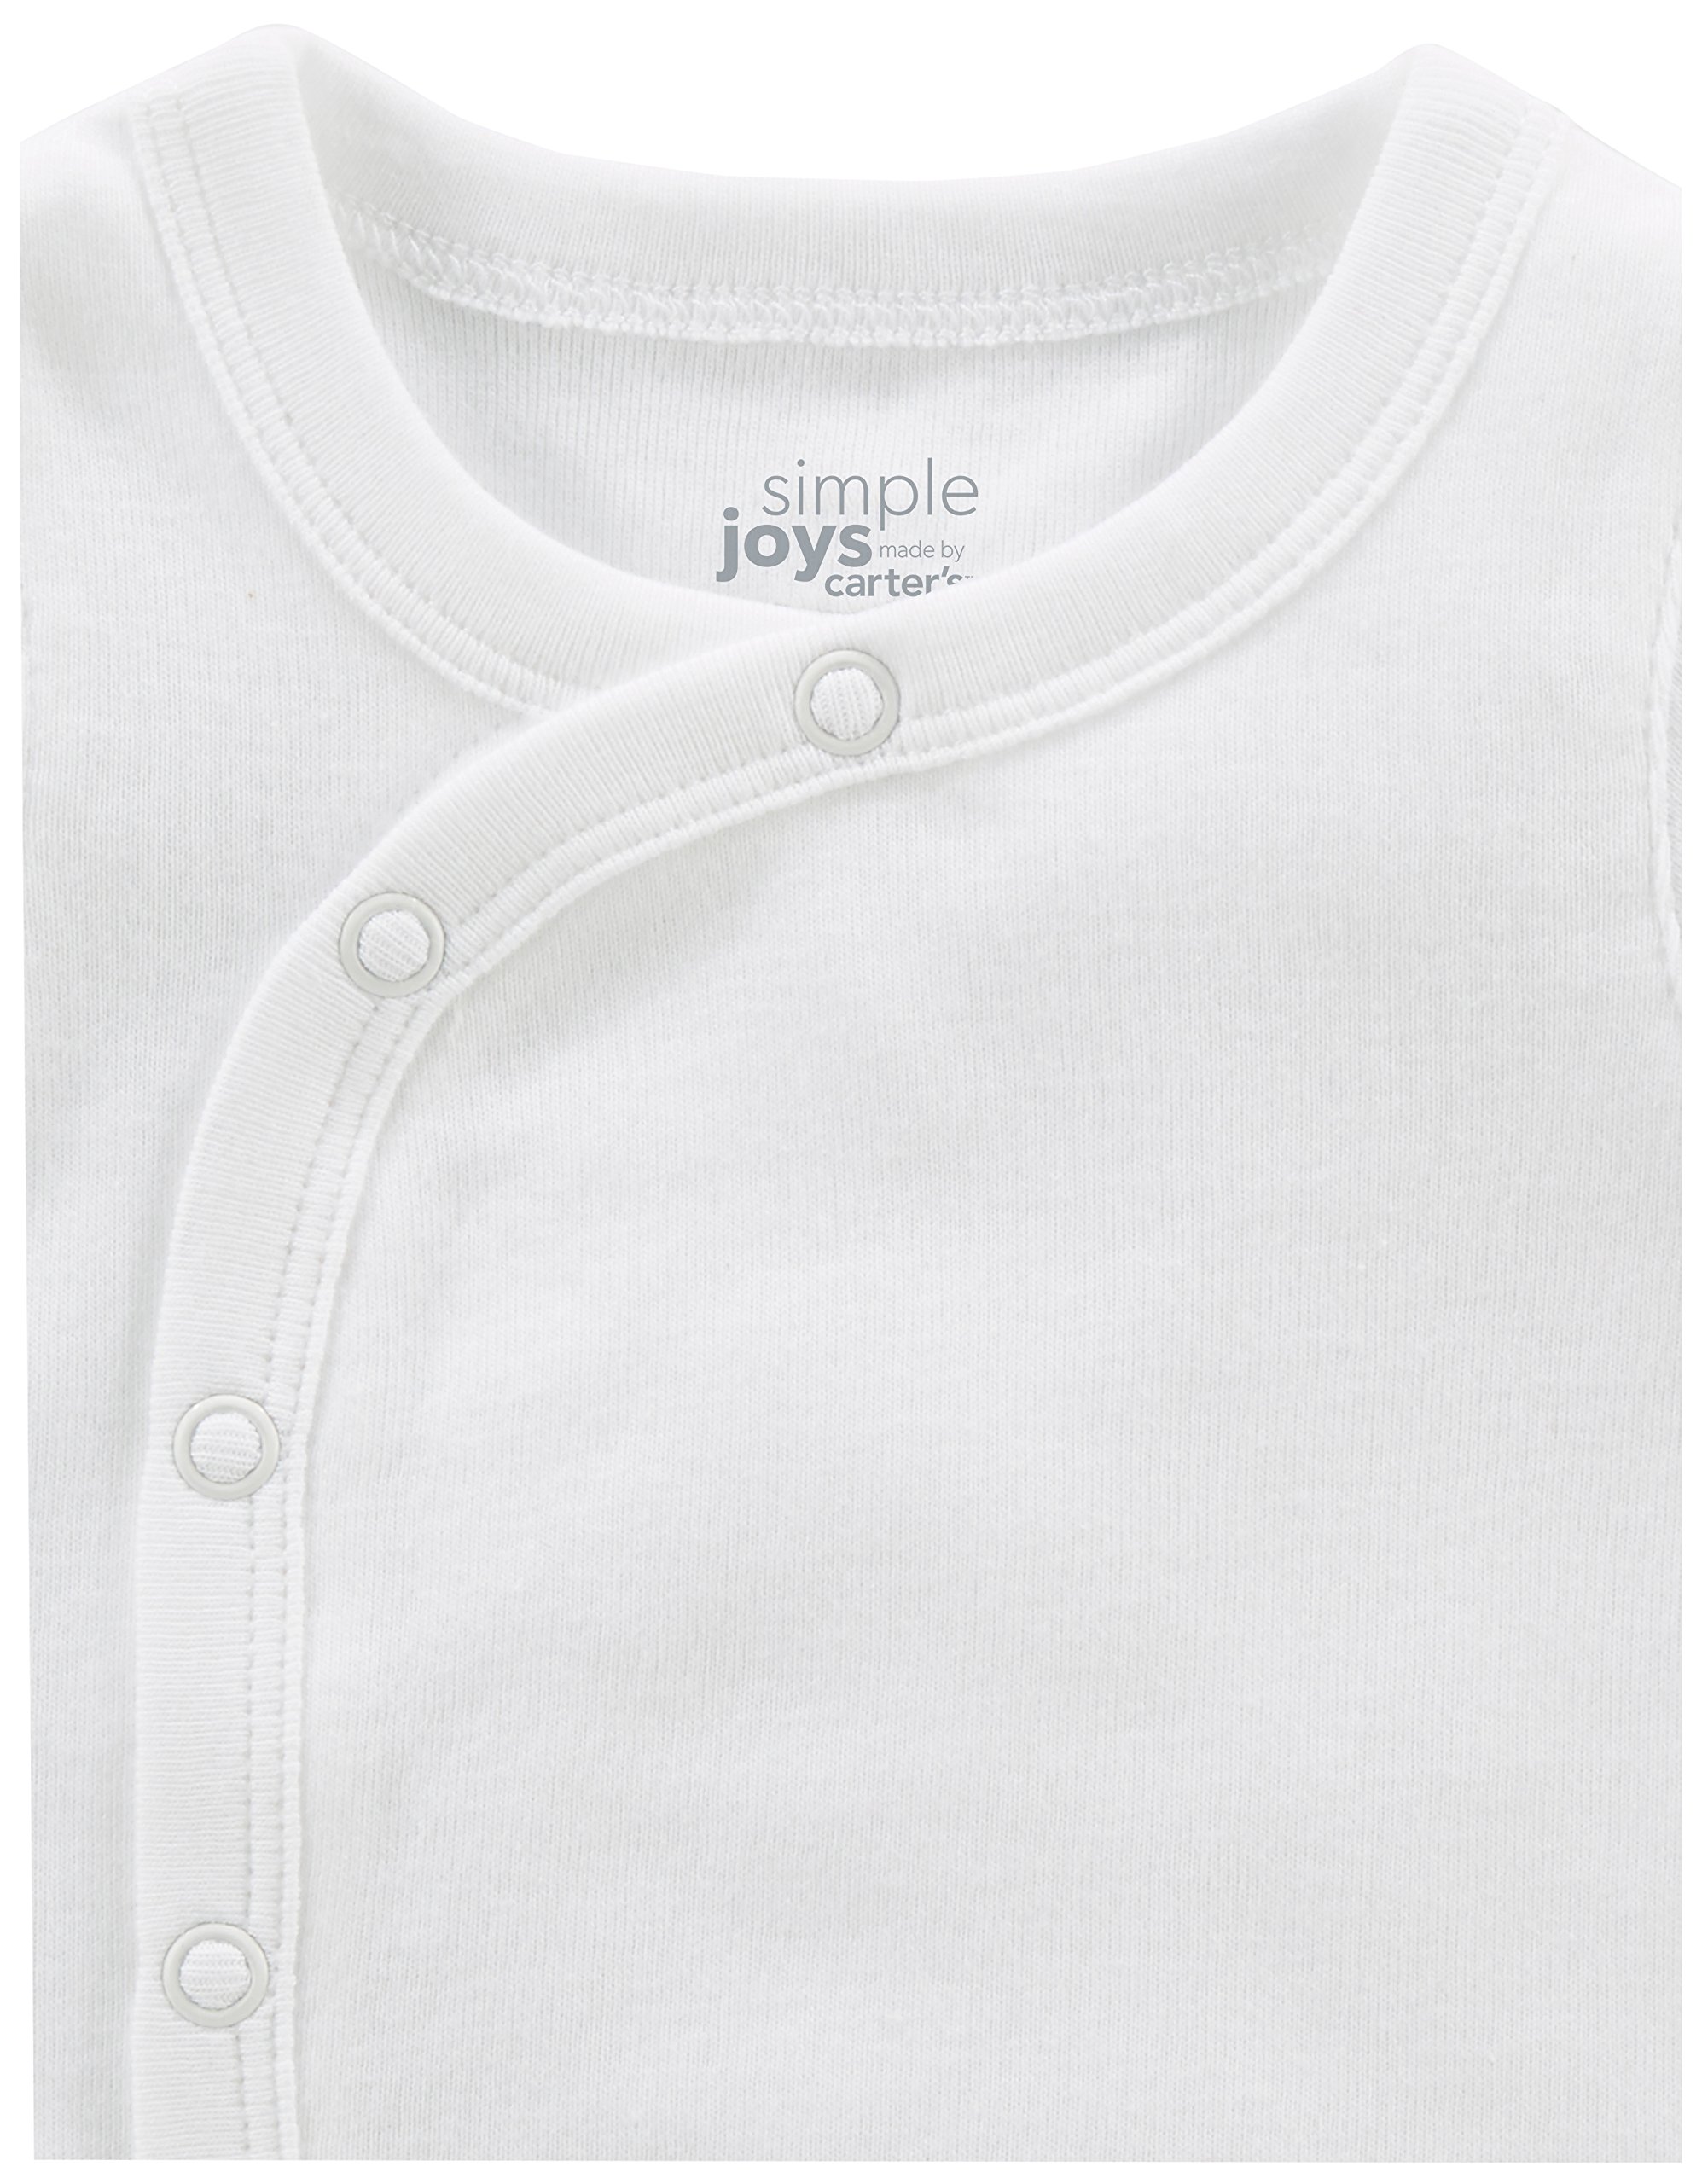 Simple Joys by Carter's Unisex Babies' Side-Snap Short-Sleeve Shirt, Pack of 6